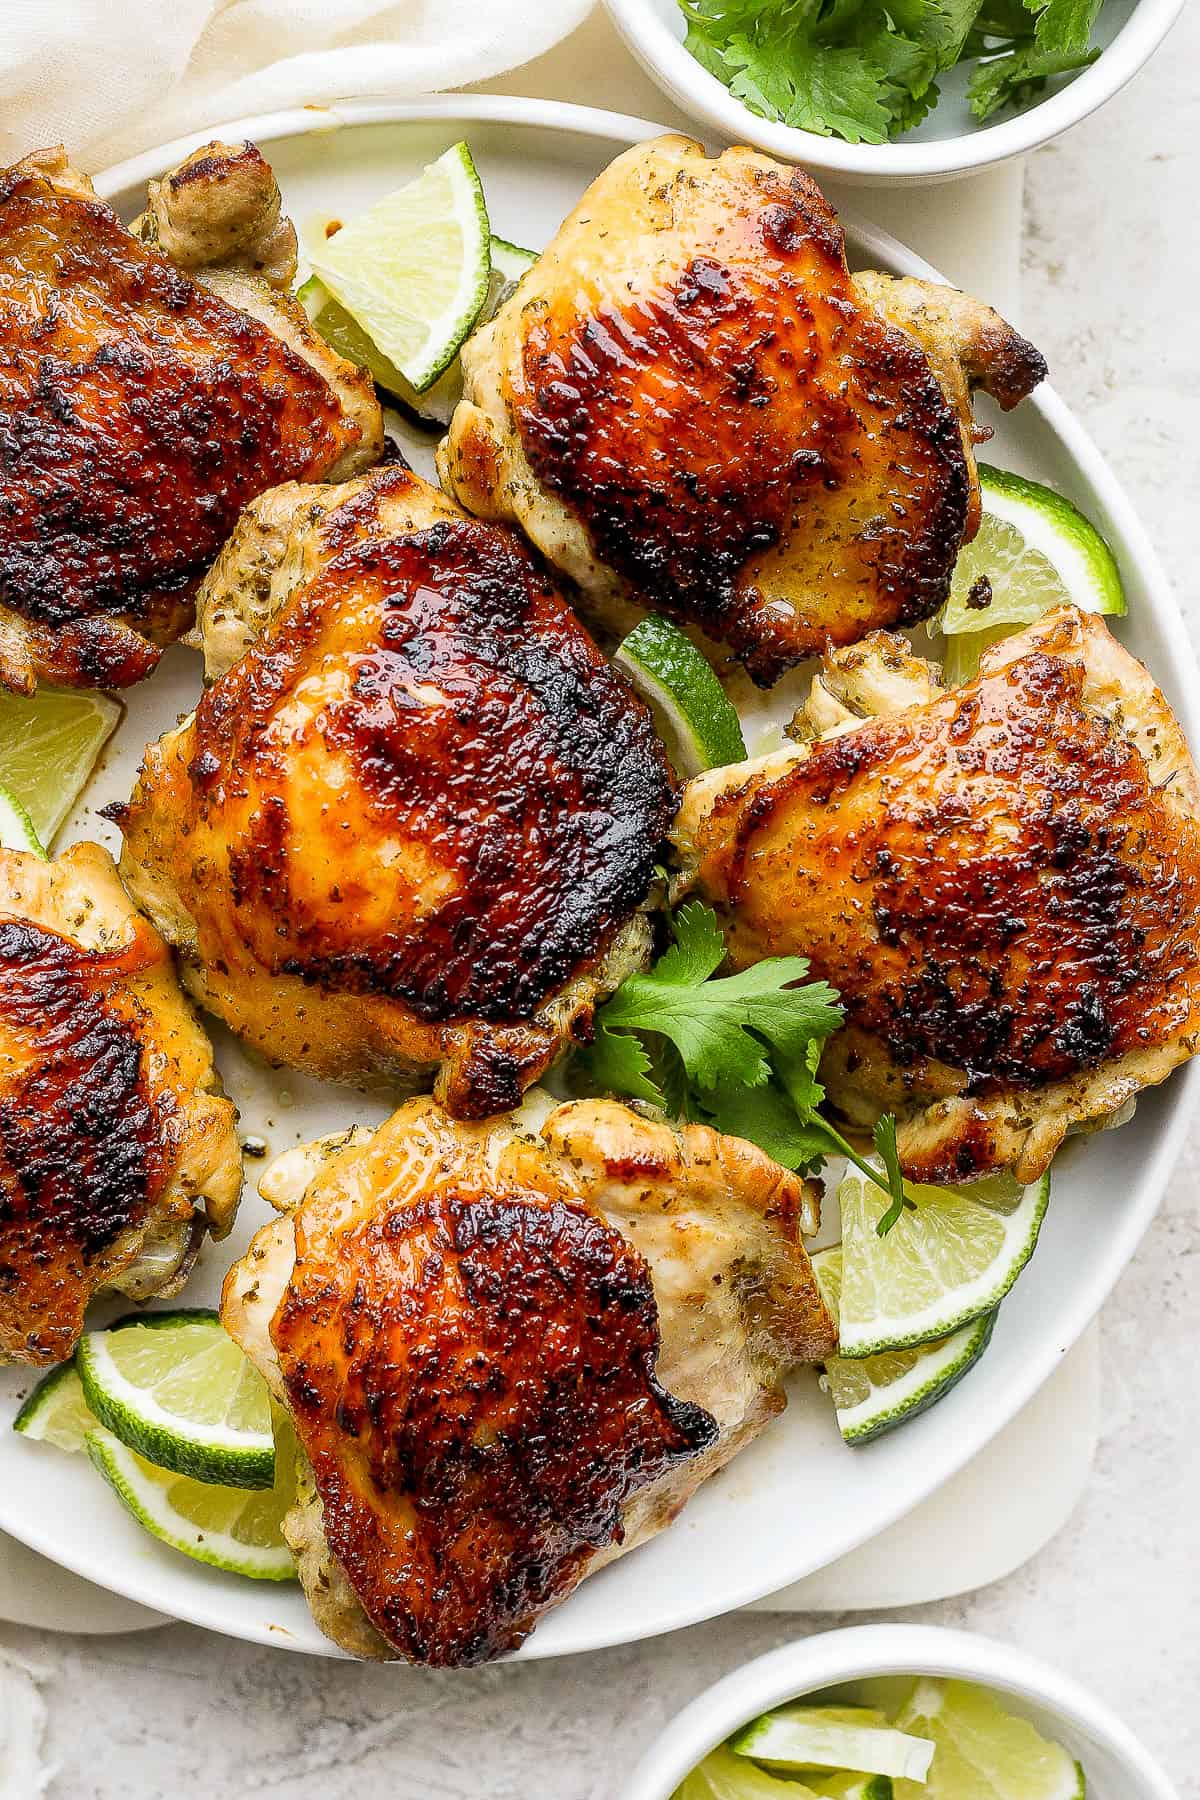 Cilantro lime chicken thighs on a plate with crispy and golden brown skin.